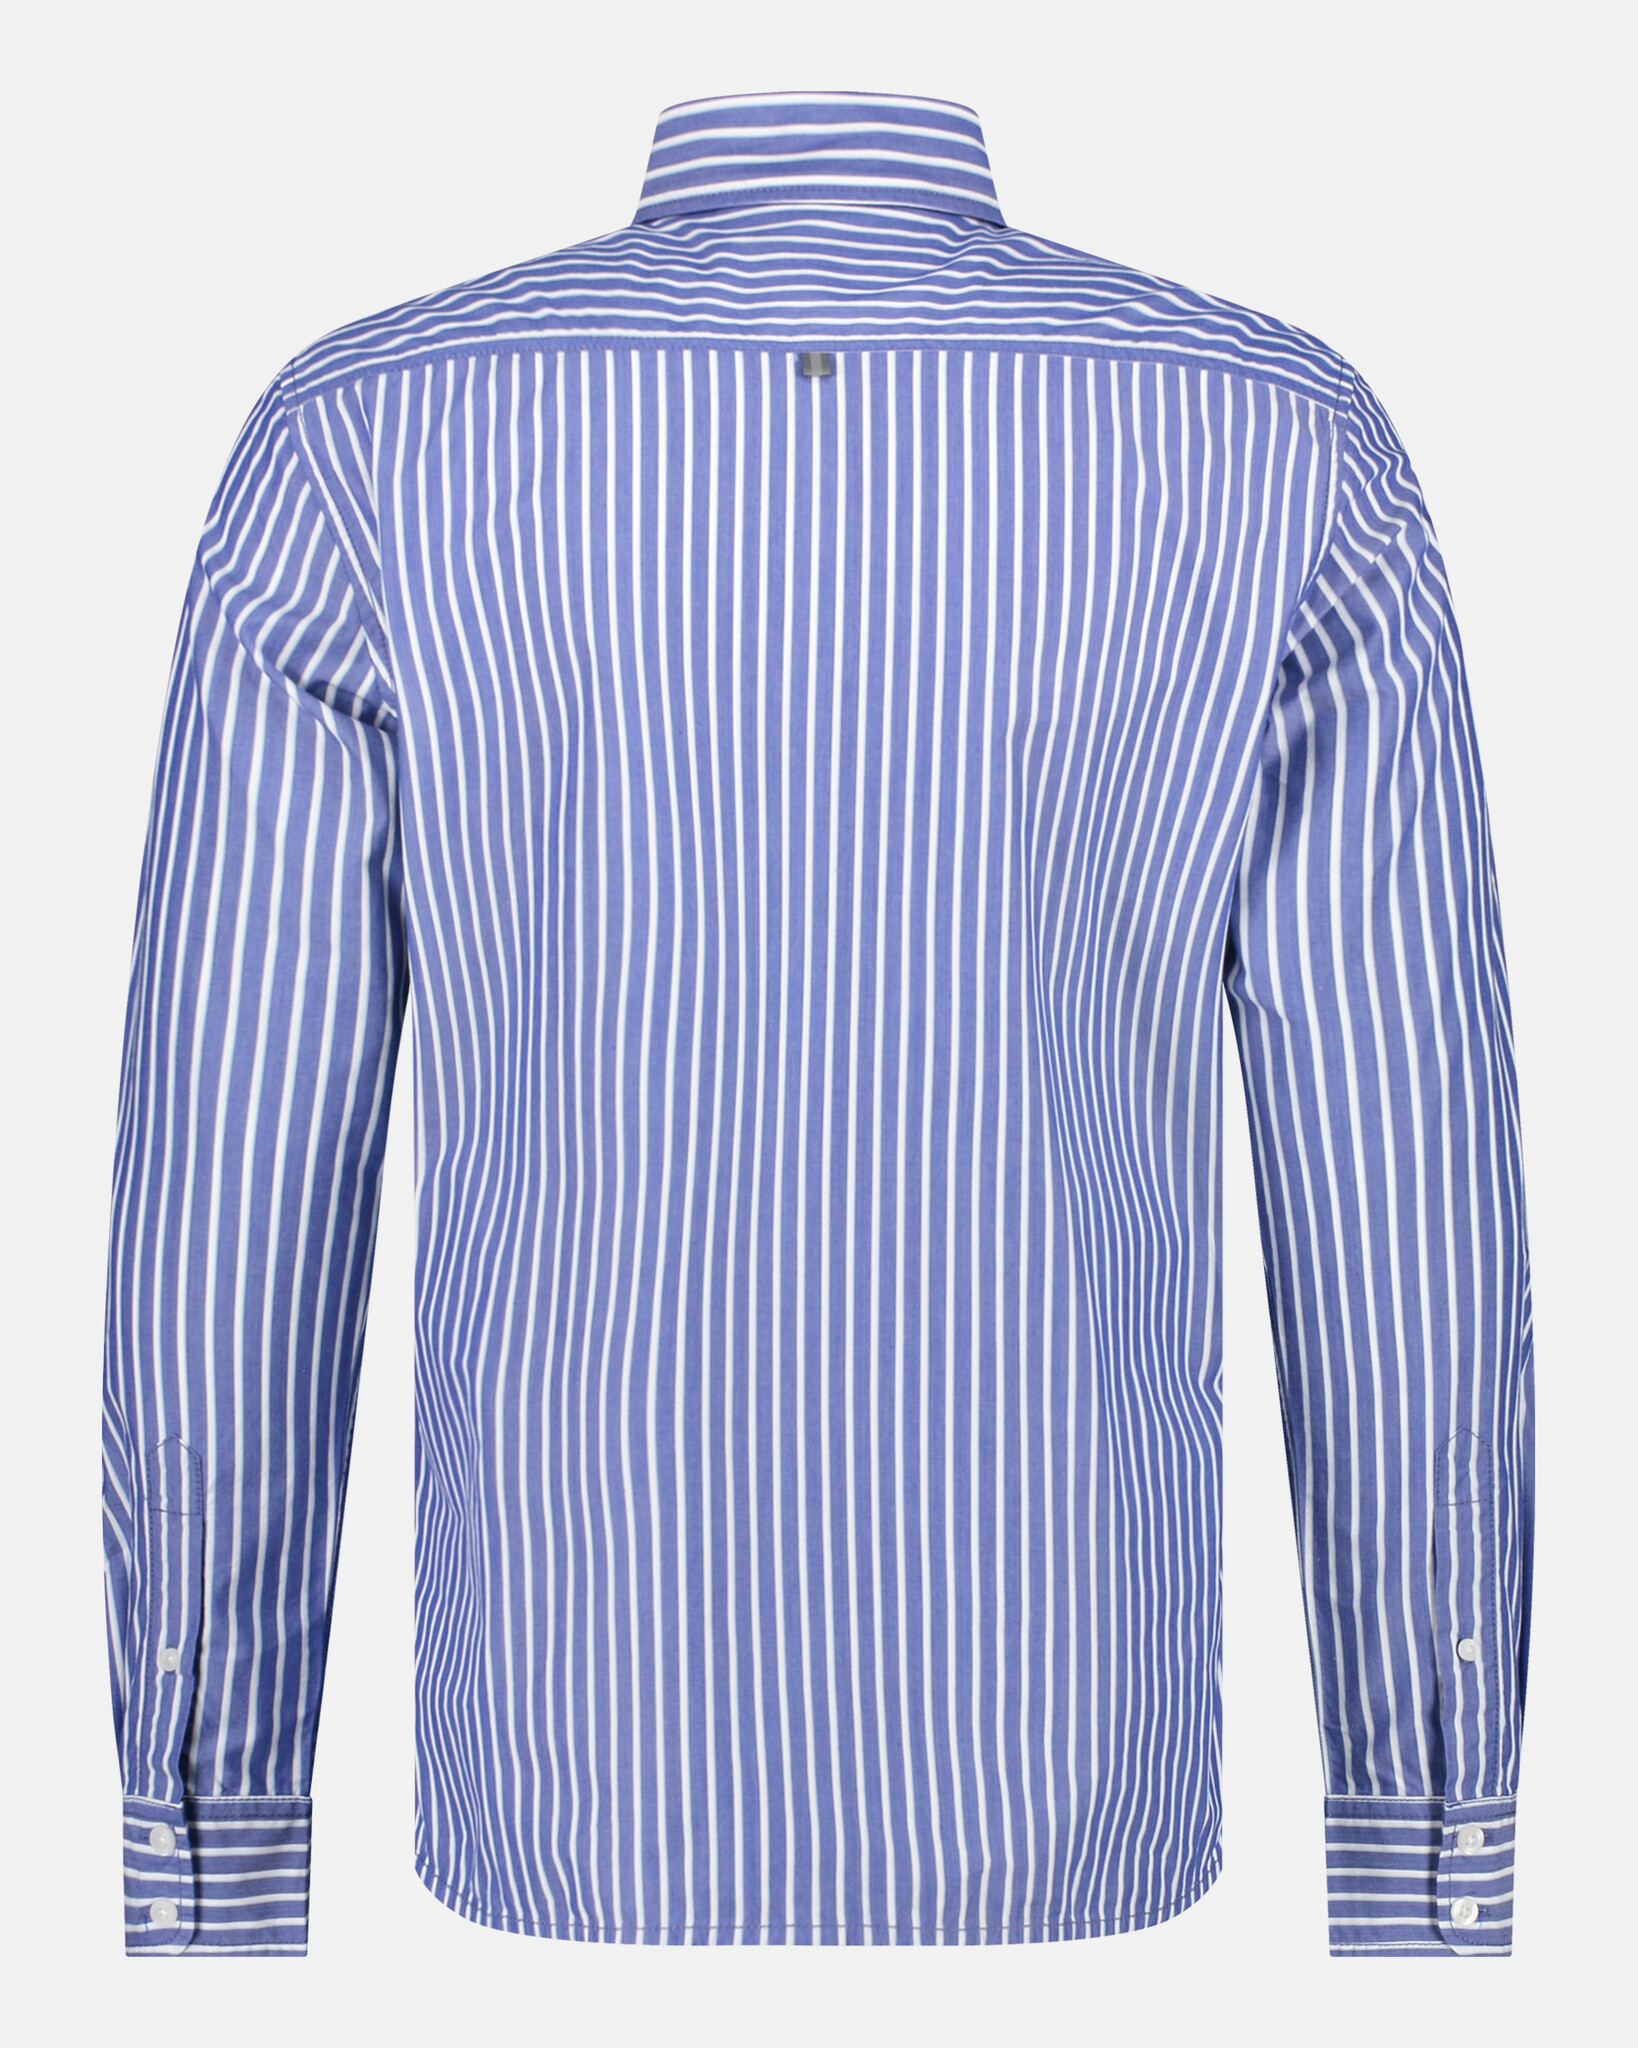 Regular fit 100% cotton, high dense poplin yarn dyed stripe shirt with button-down collar and tonal embroidered trademark logo